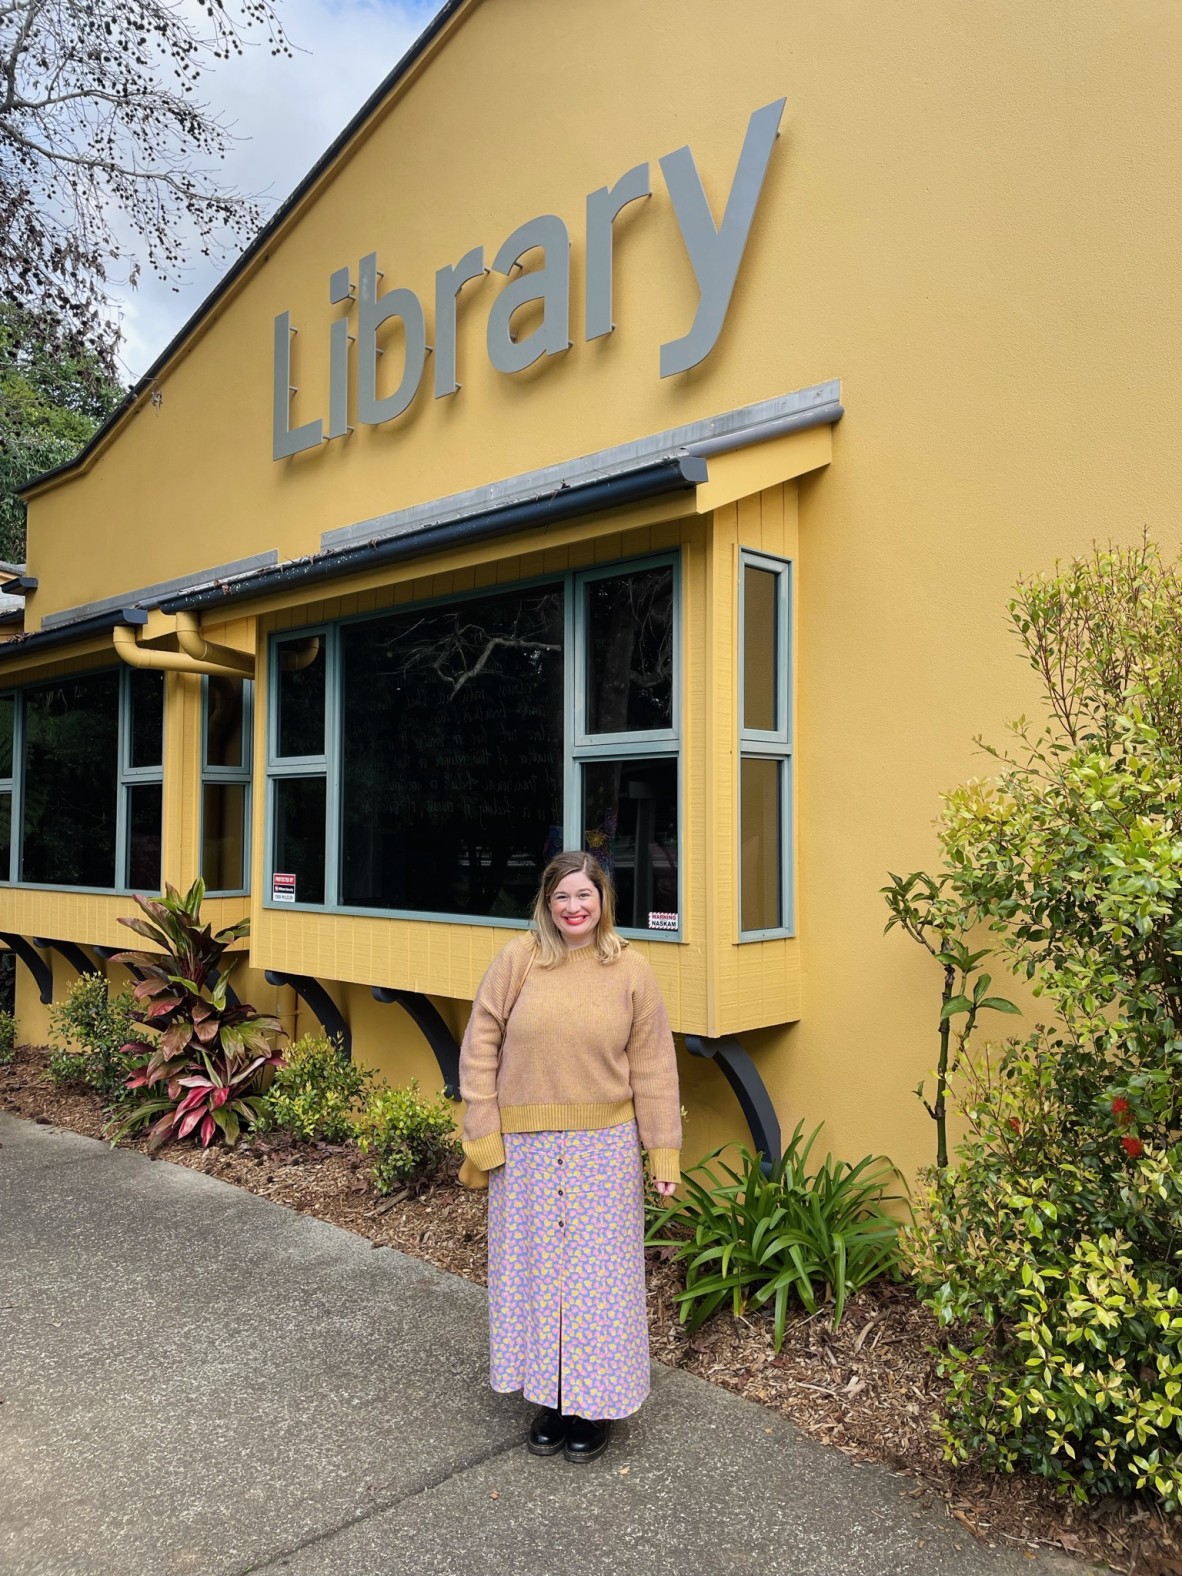 Rhiannon smiles in a yellow jumper and long purple skirt she stands in front of a yellow building that says library